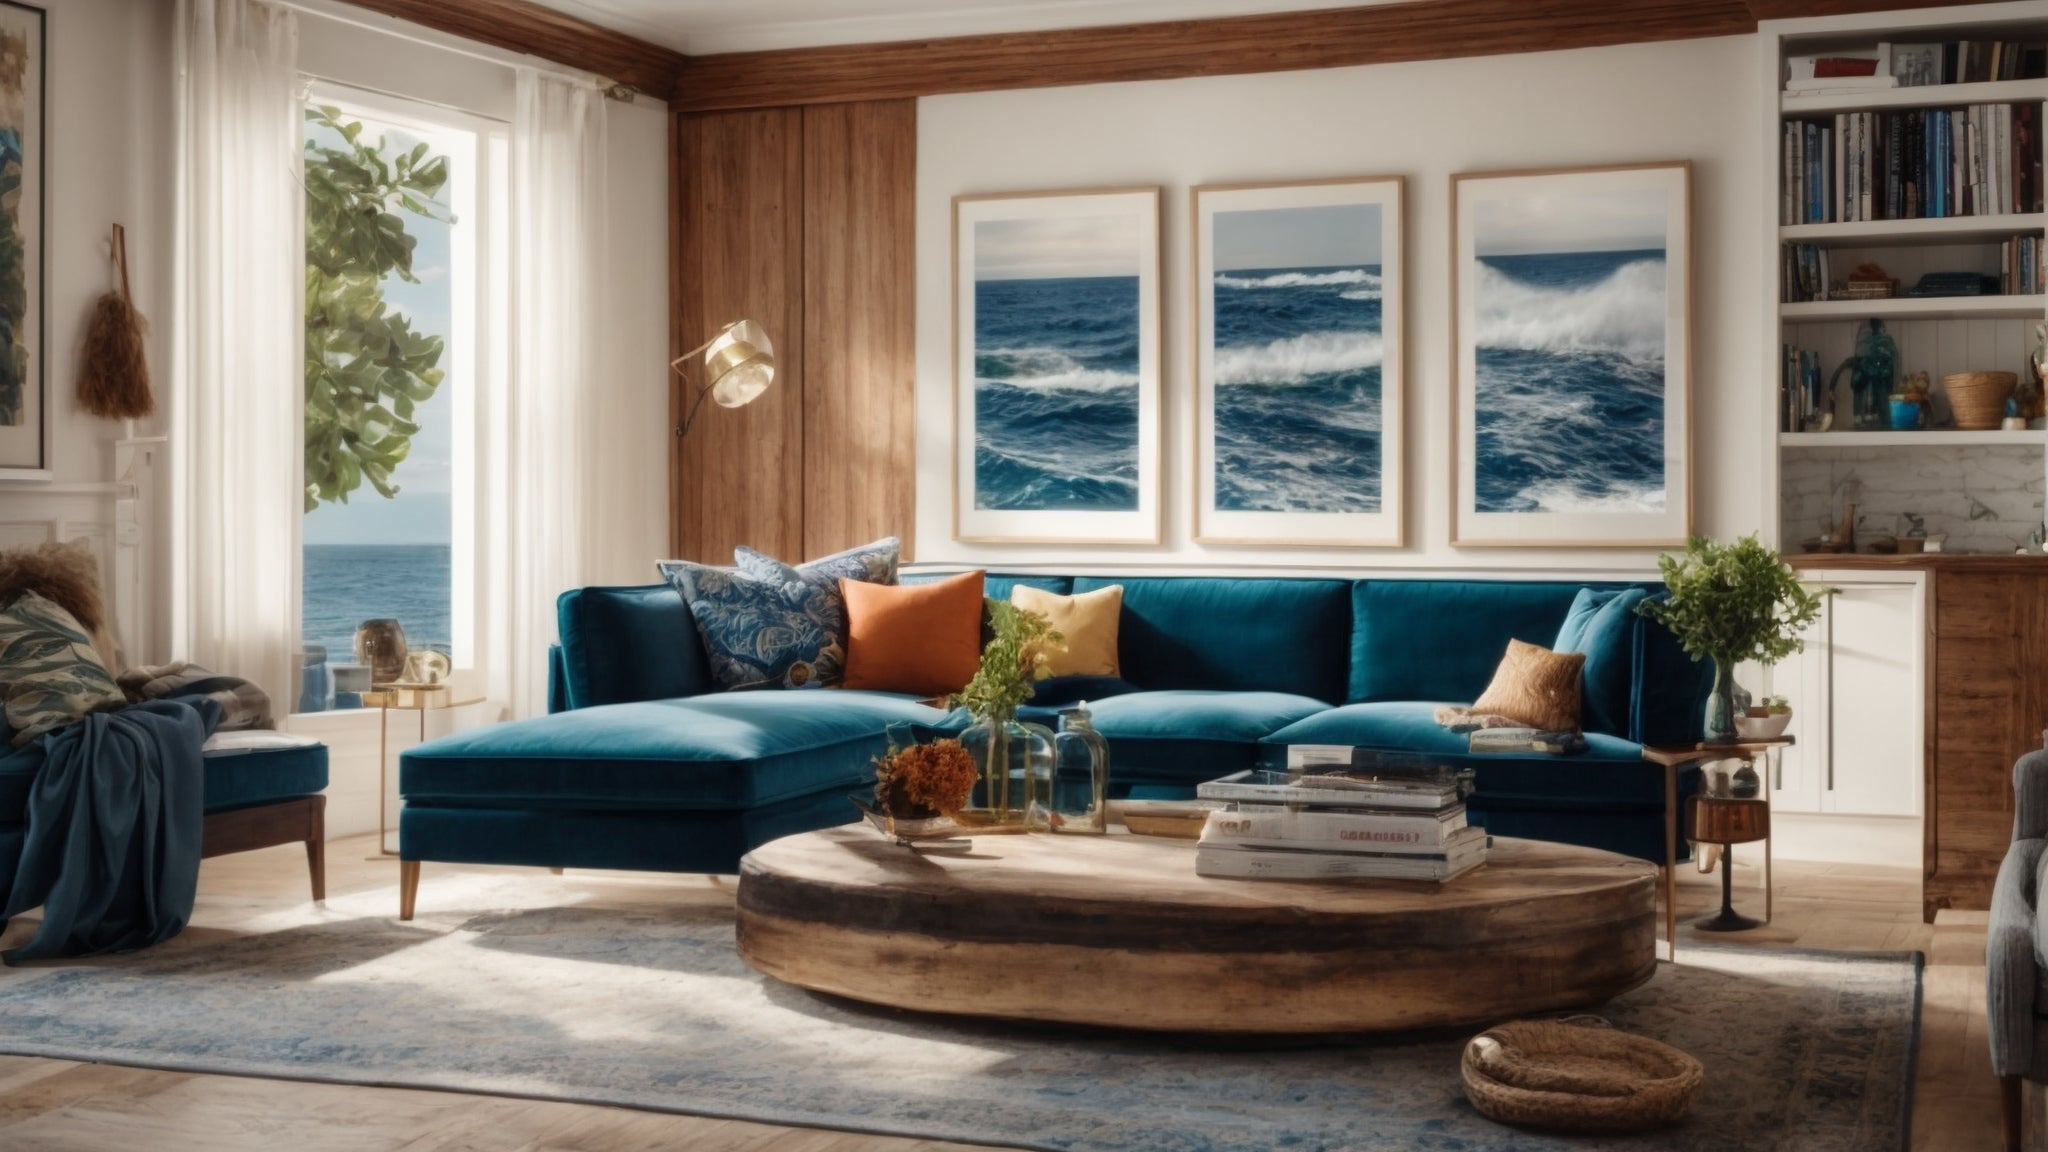 Designing a Nautical-Themed Living Room: A Step-by-Step Guide